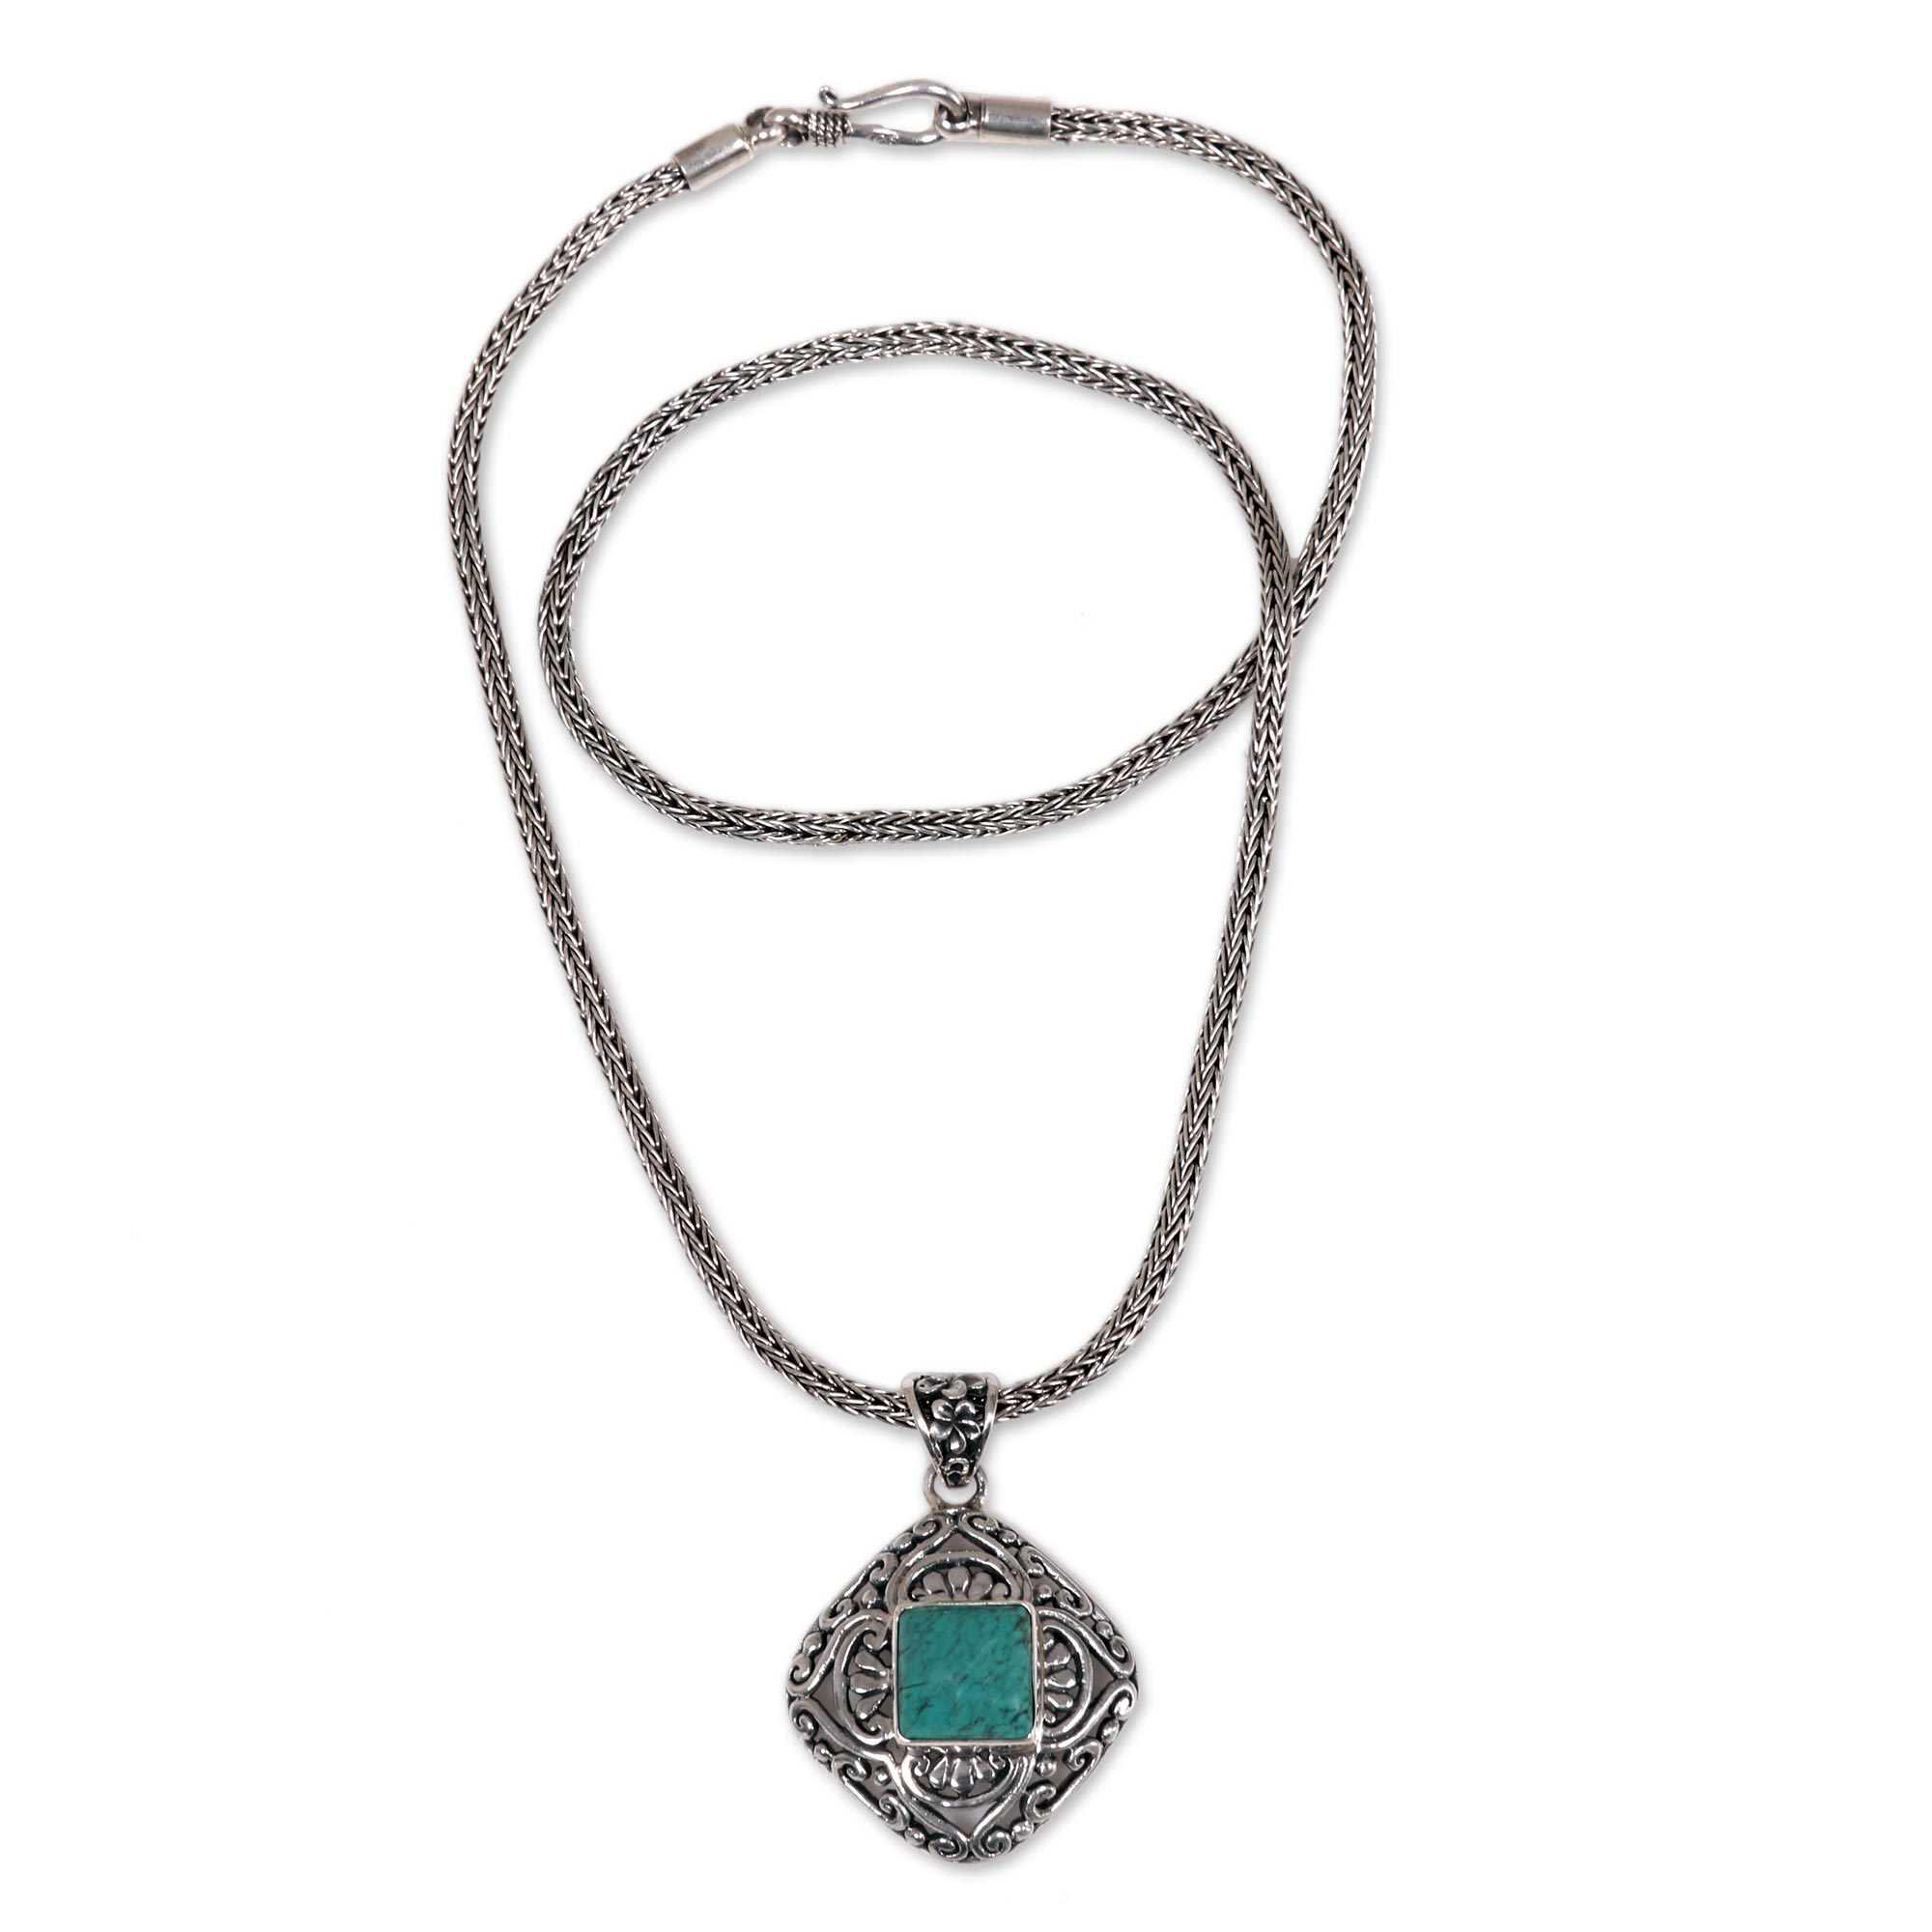 Turquoise and Sterling Silver Handmade Pendant Necklace - Lotus Chic ...